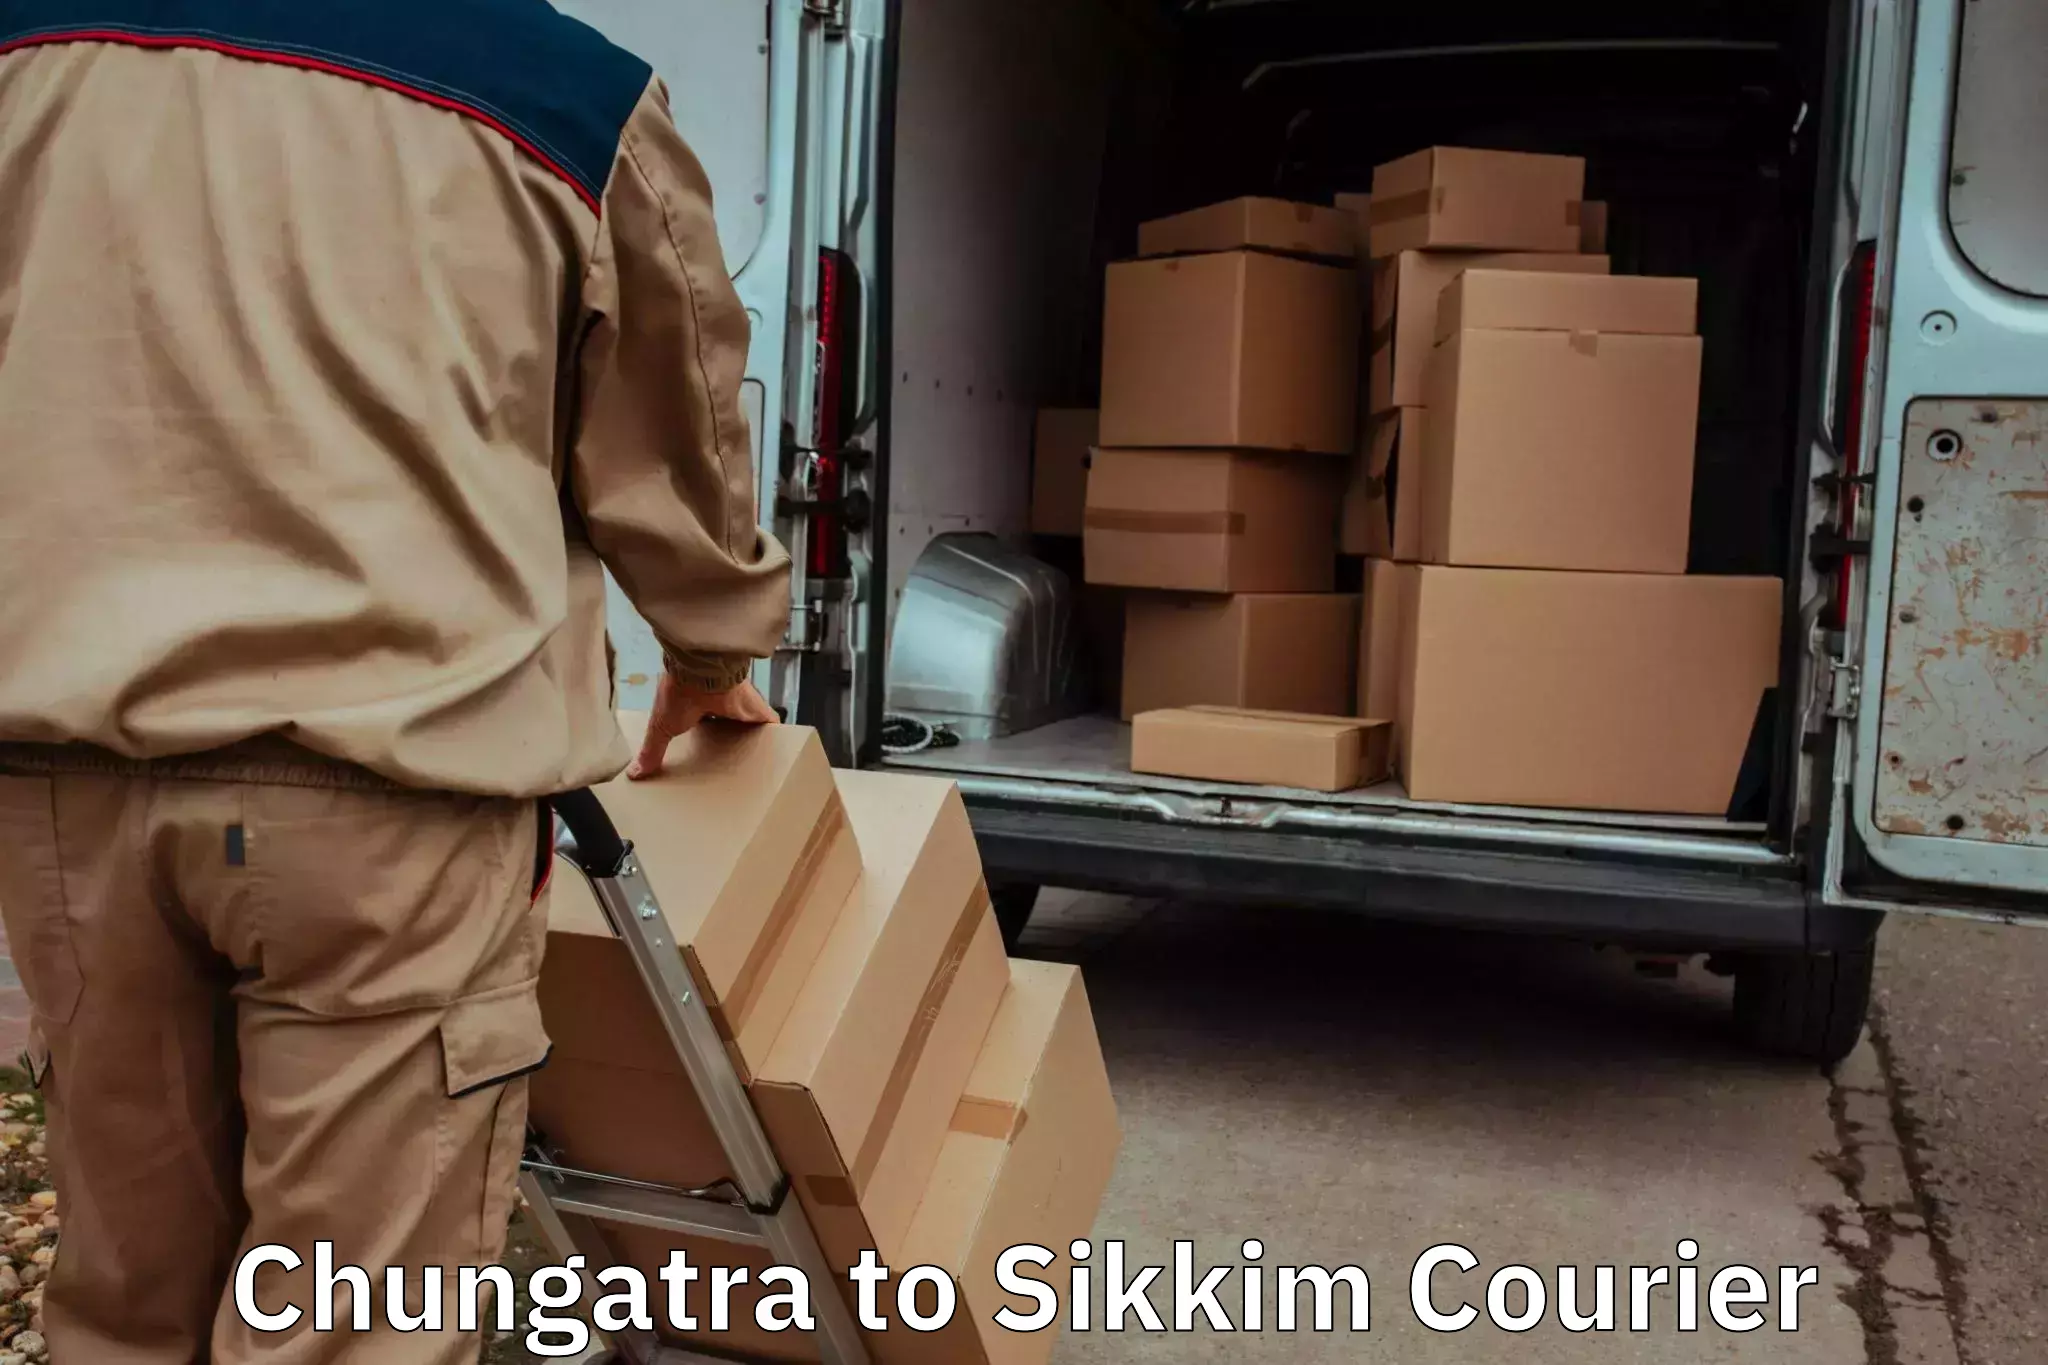 Household goods transport service Chungatra to East Sikkim